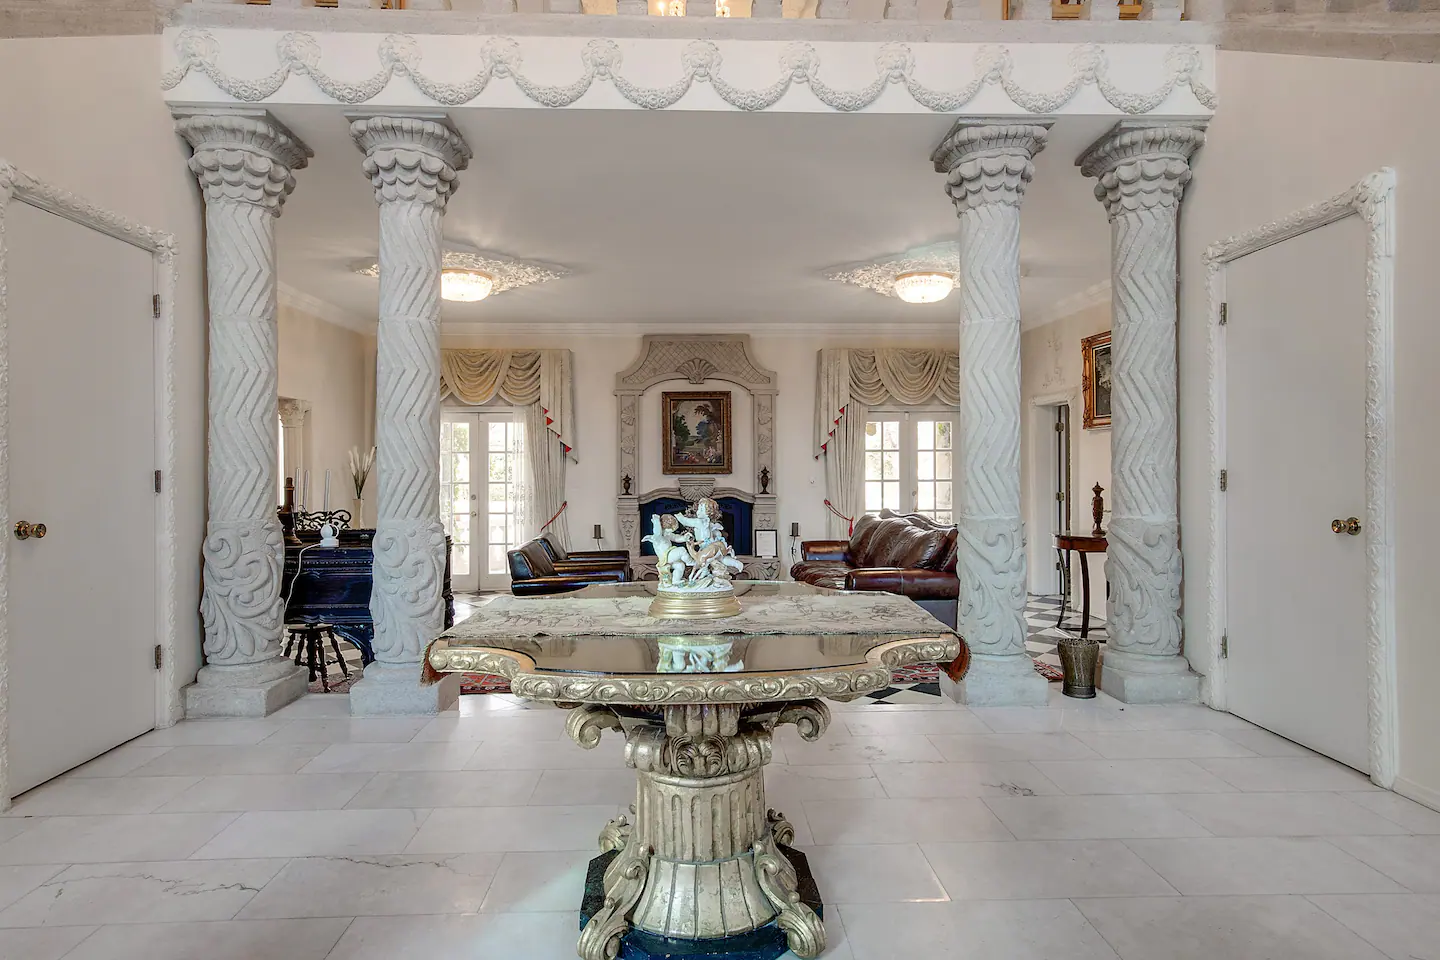 The Villa is a unique and elegant space adorned with beautiful paintings, marble and tile floors, ceiling murals, and decorative pillars.